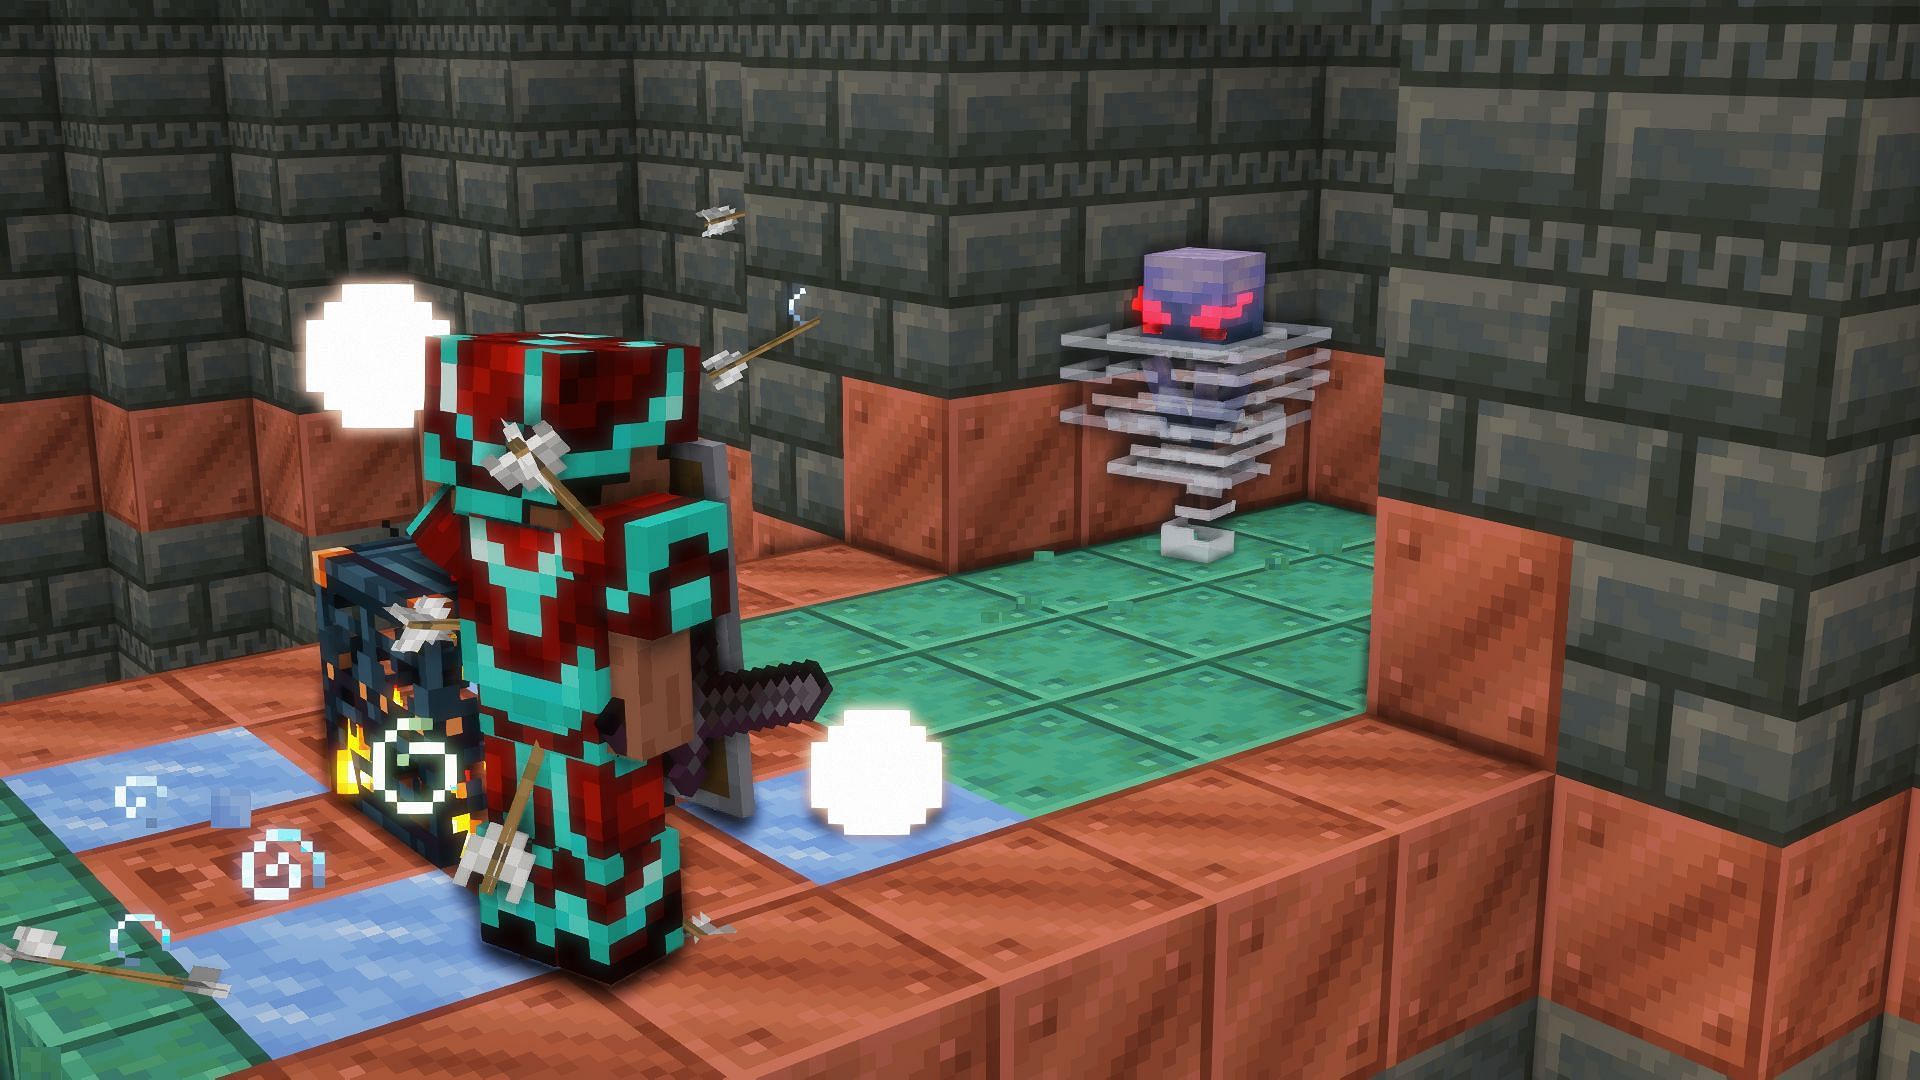 Player versus breeze in the trial chamber (Image via Mojang)